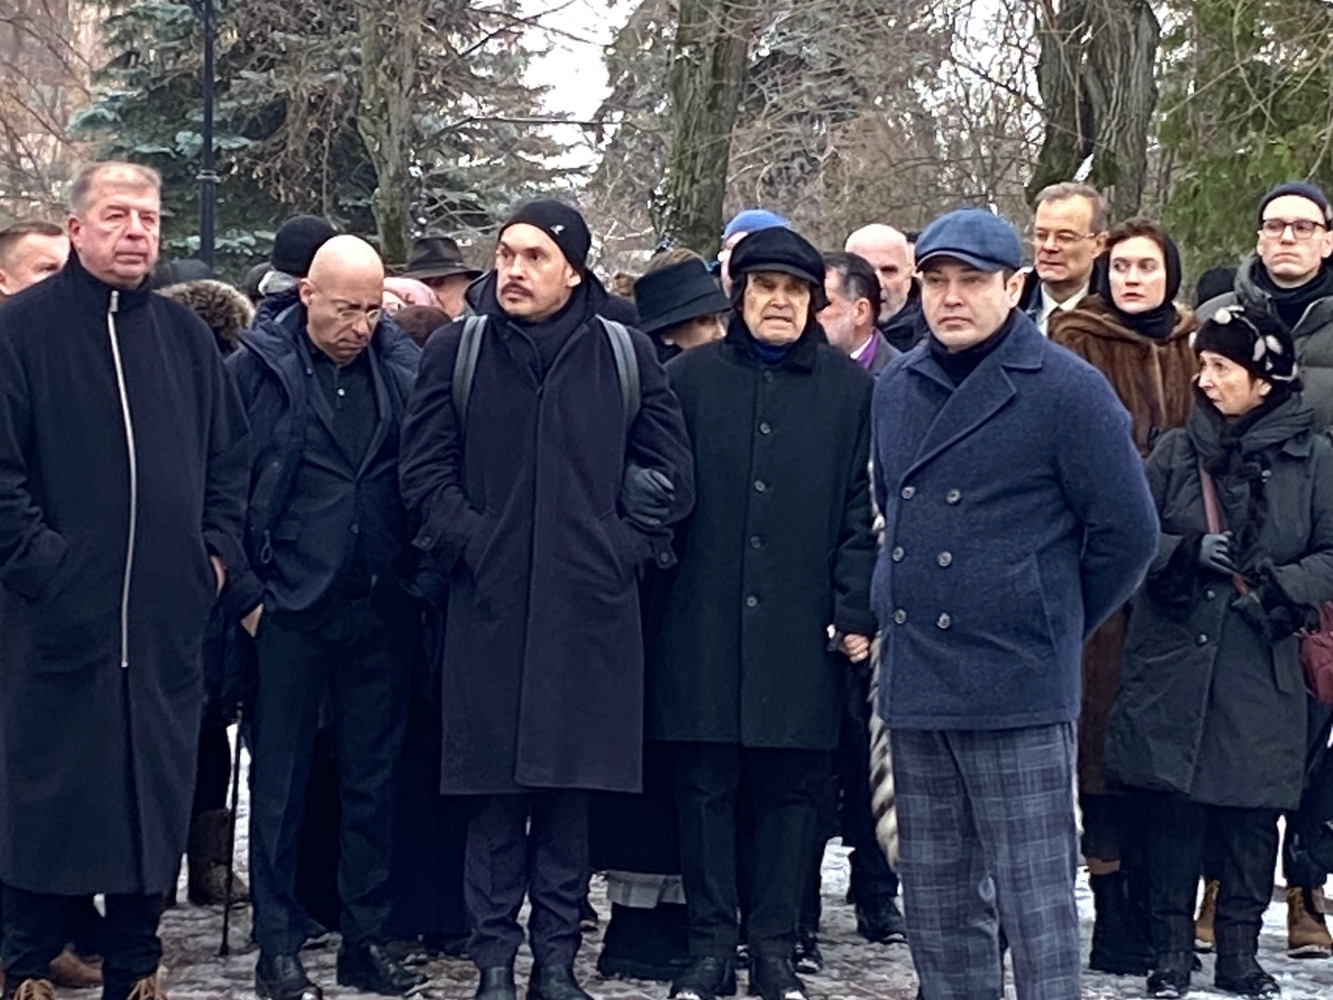 Husband and son at the funeral of Inna Churikova: footage from the Novodevichy cemetery